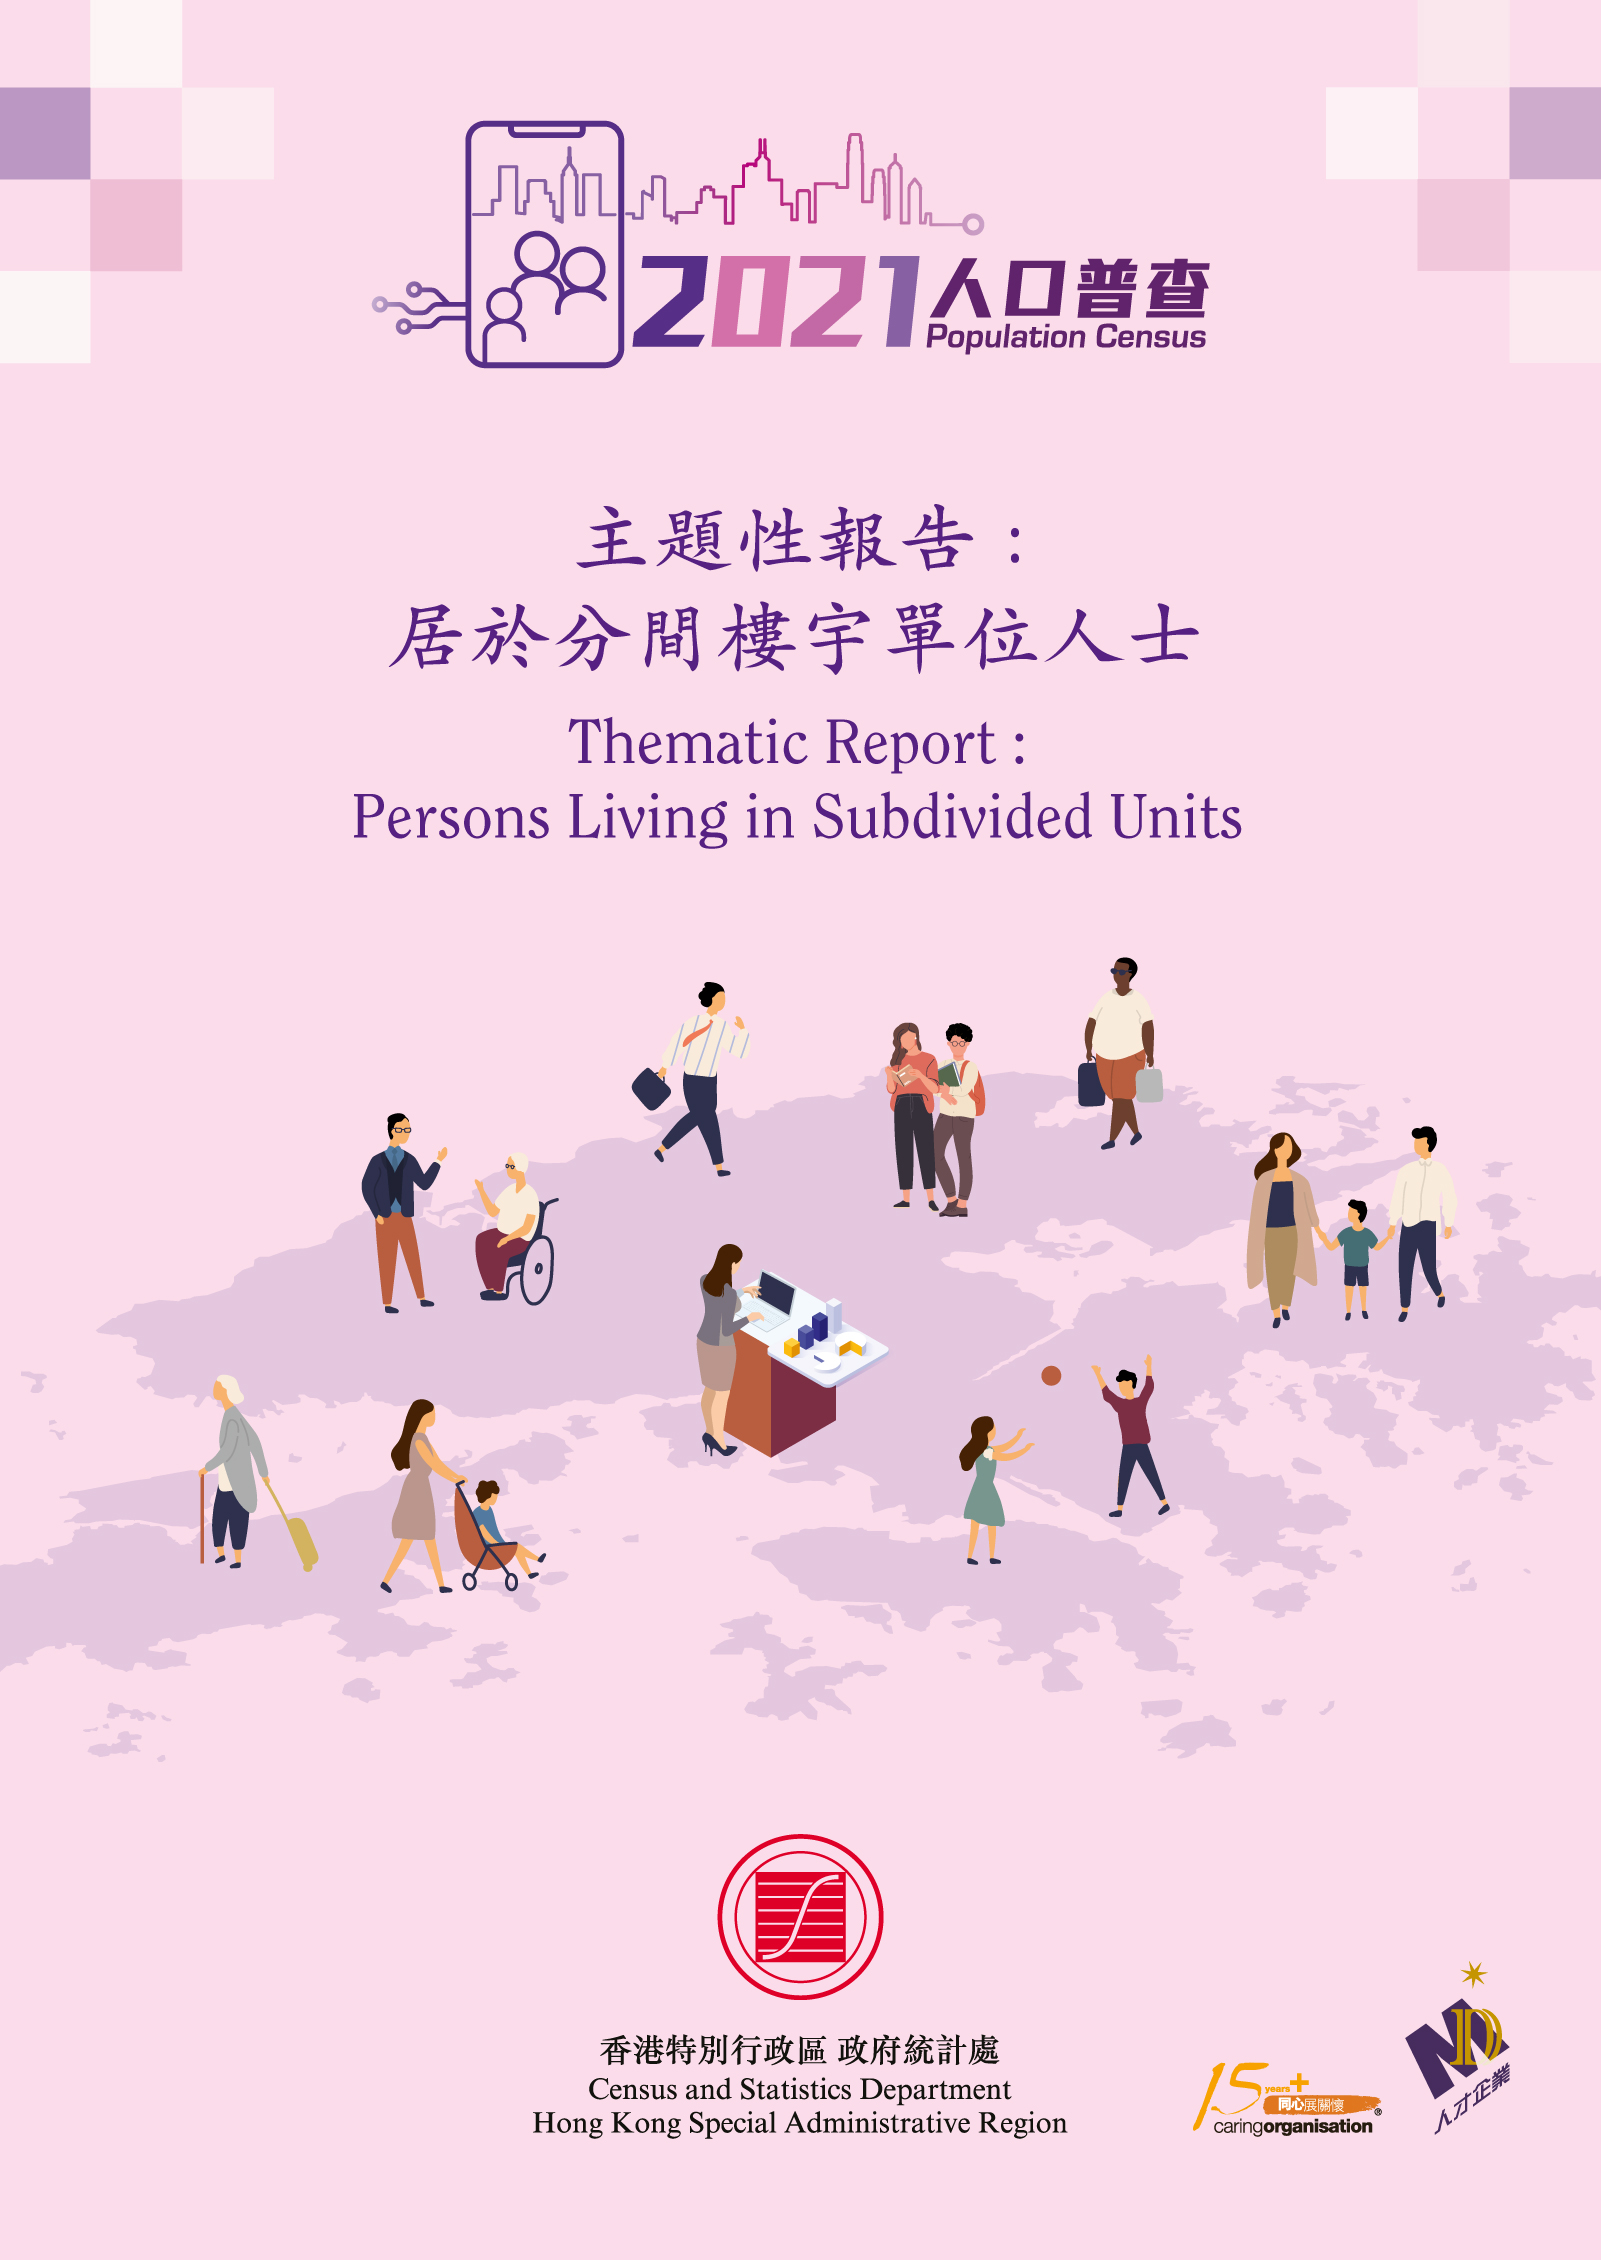 Thematic Report: Persons Living in Subdivided Units